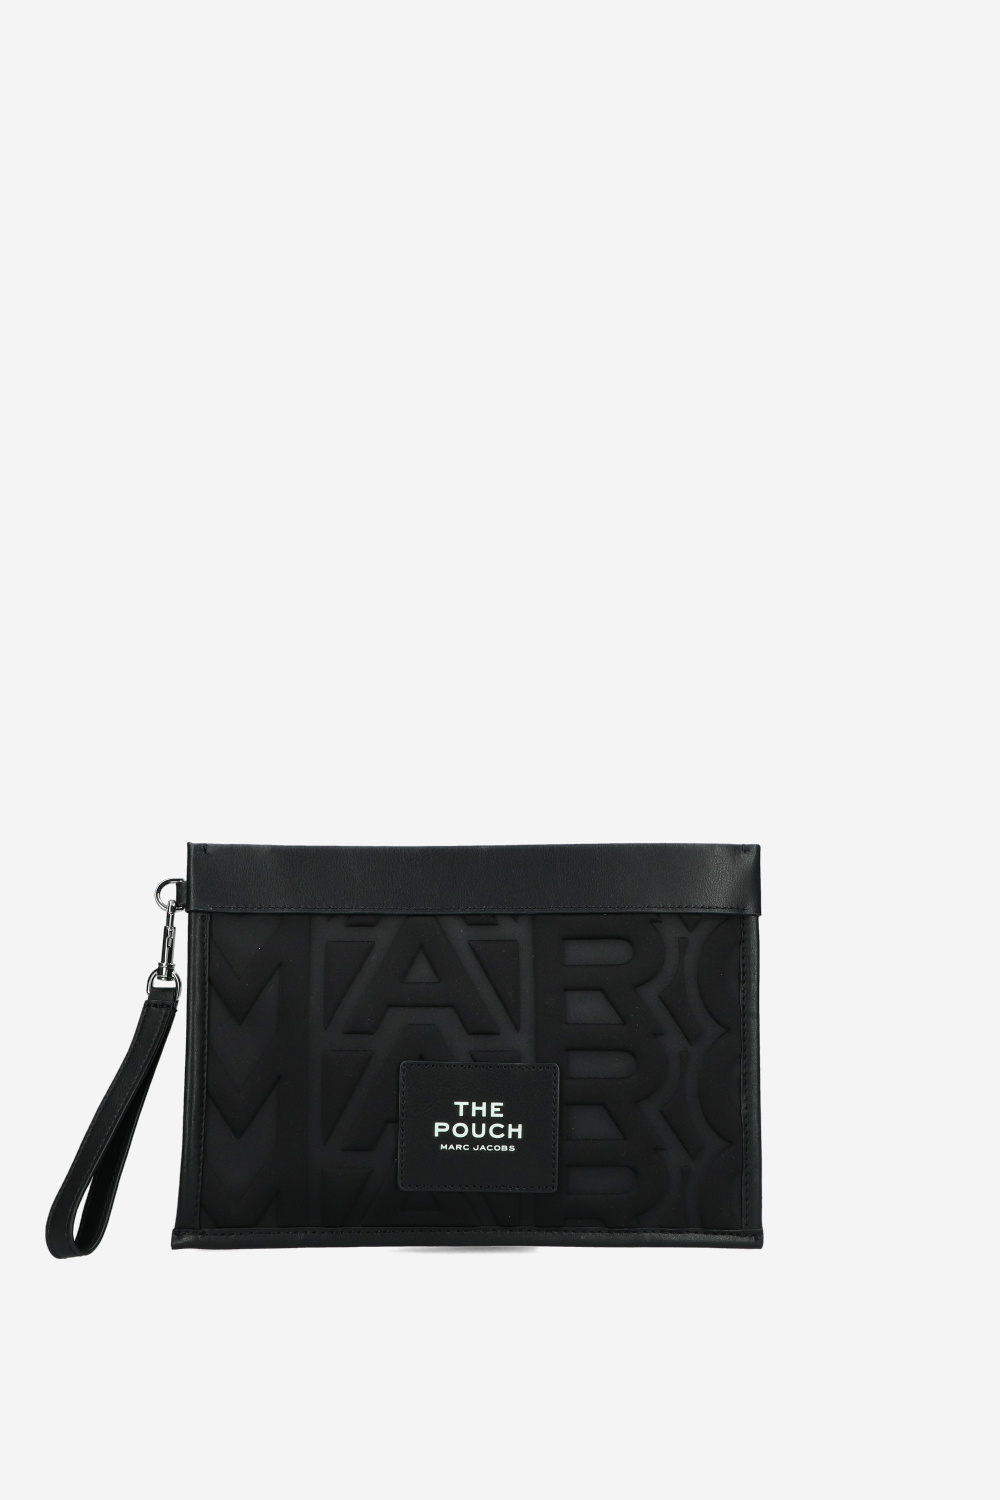 Marc Jacobs Clutch at